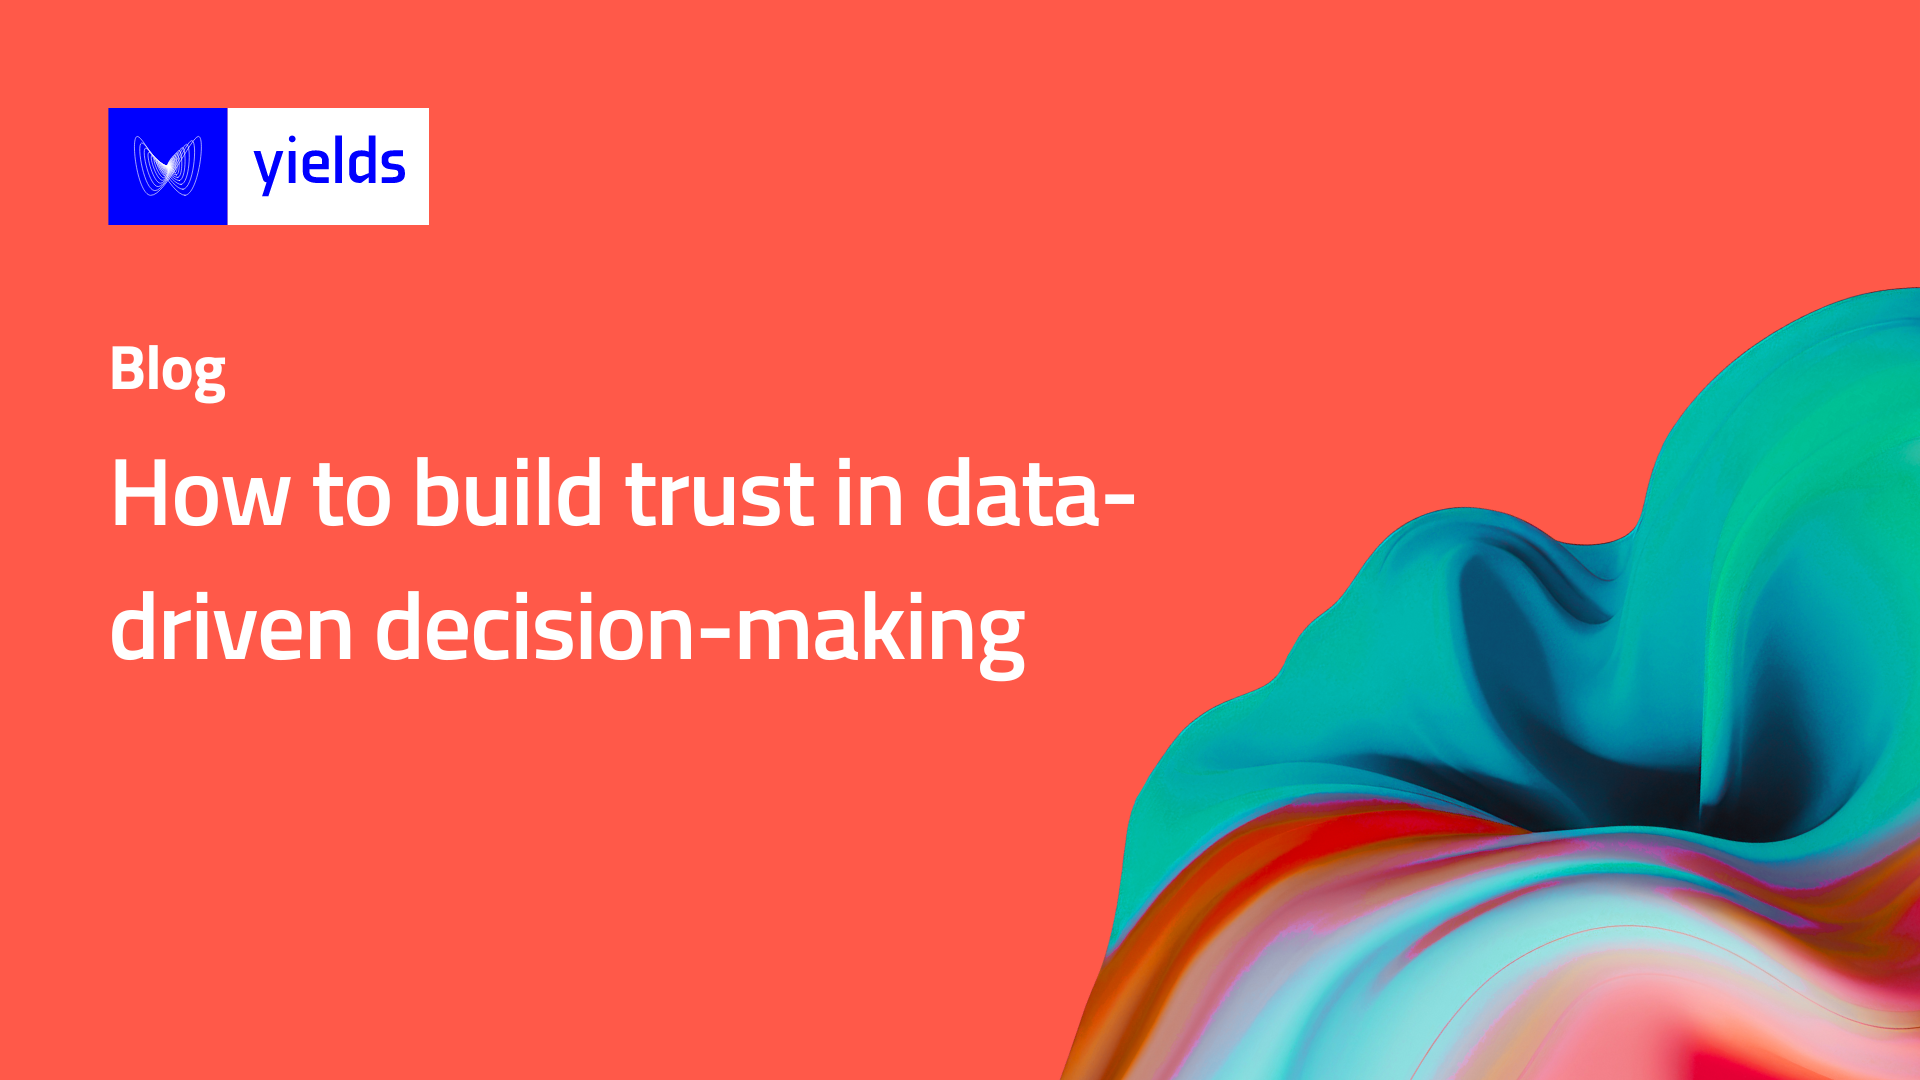 How to build trust in data-driven decision-making